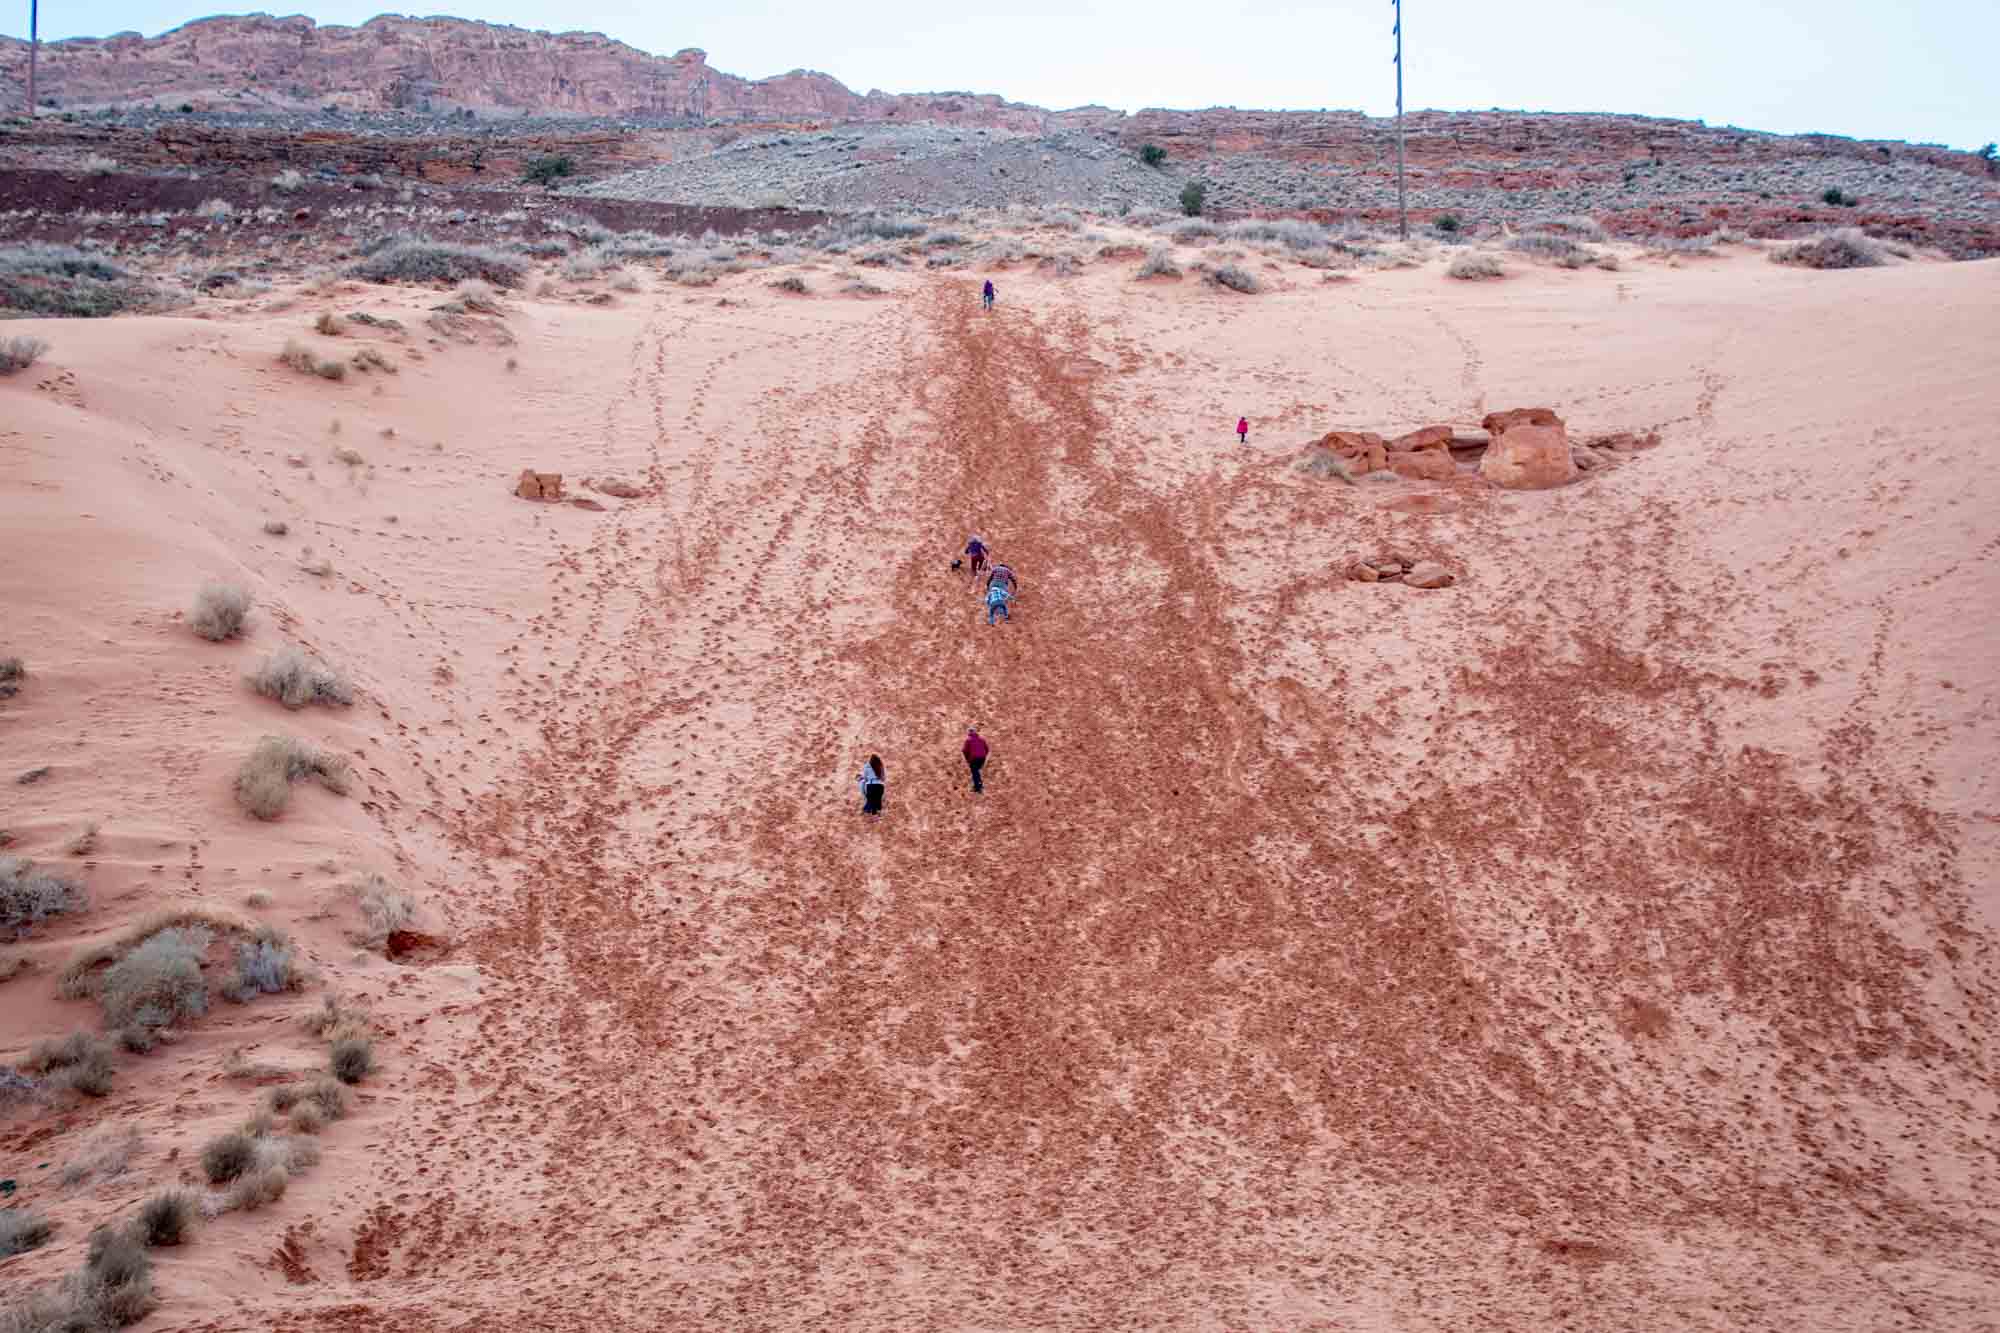 People hiking up the Moab Sand Hill for sledding